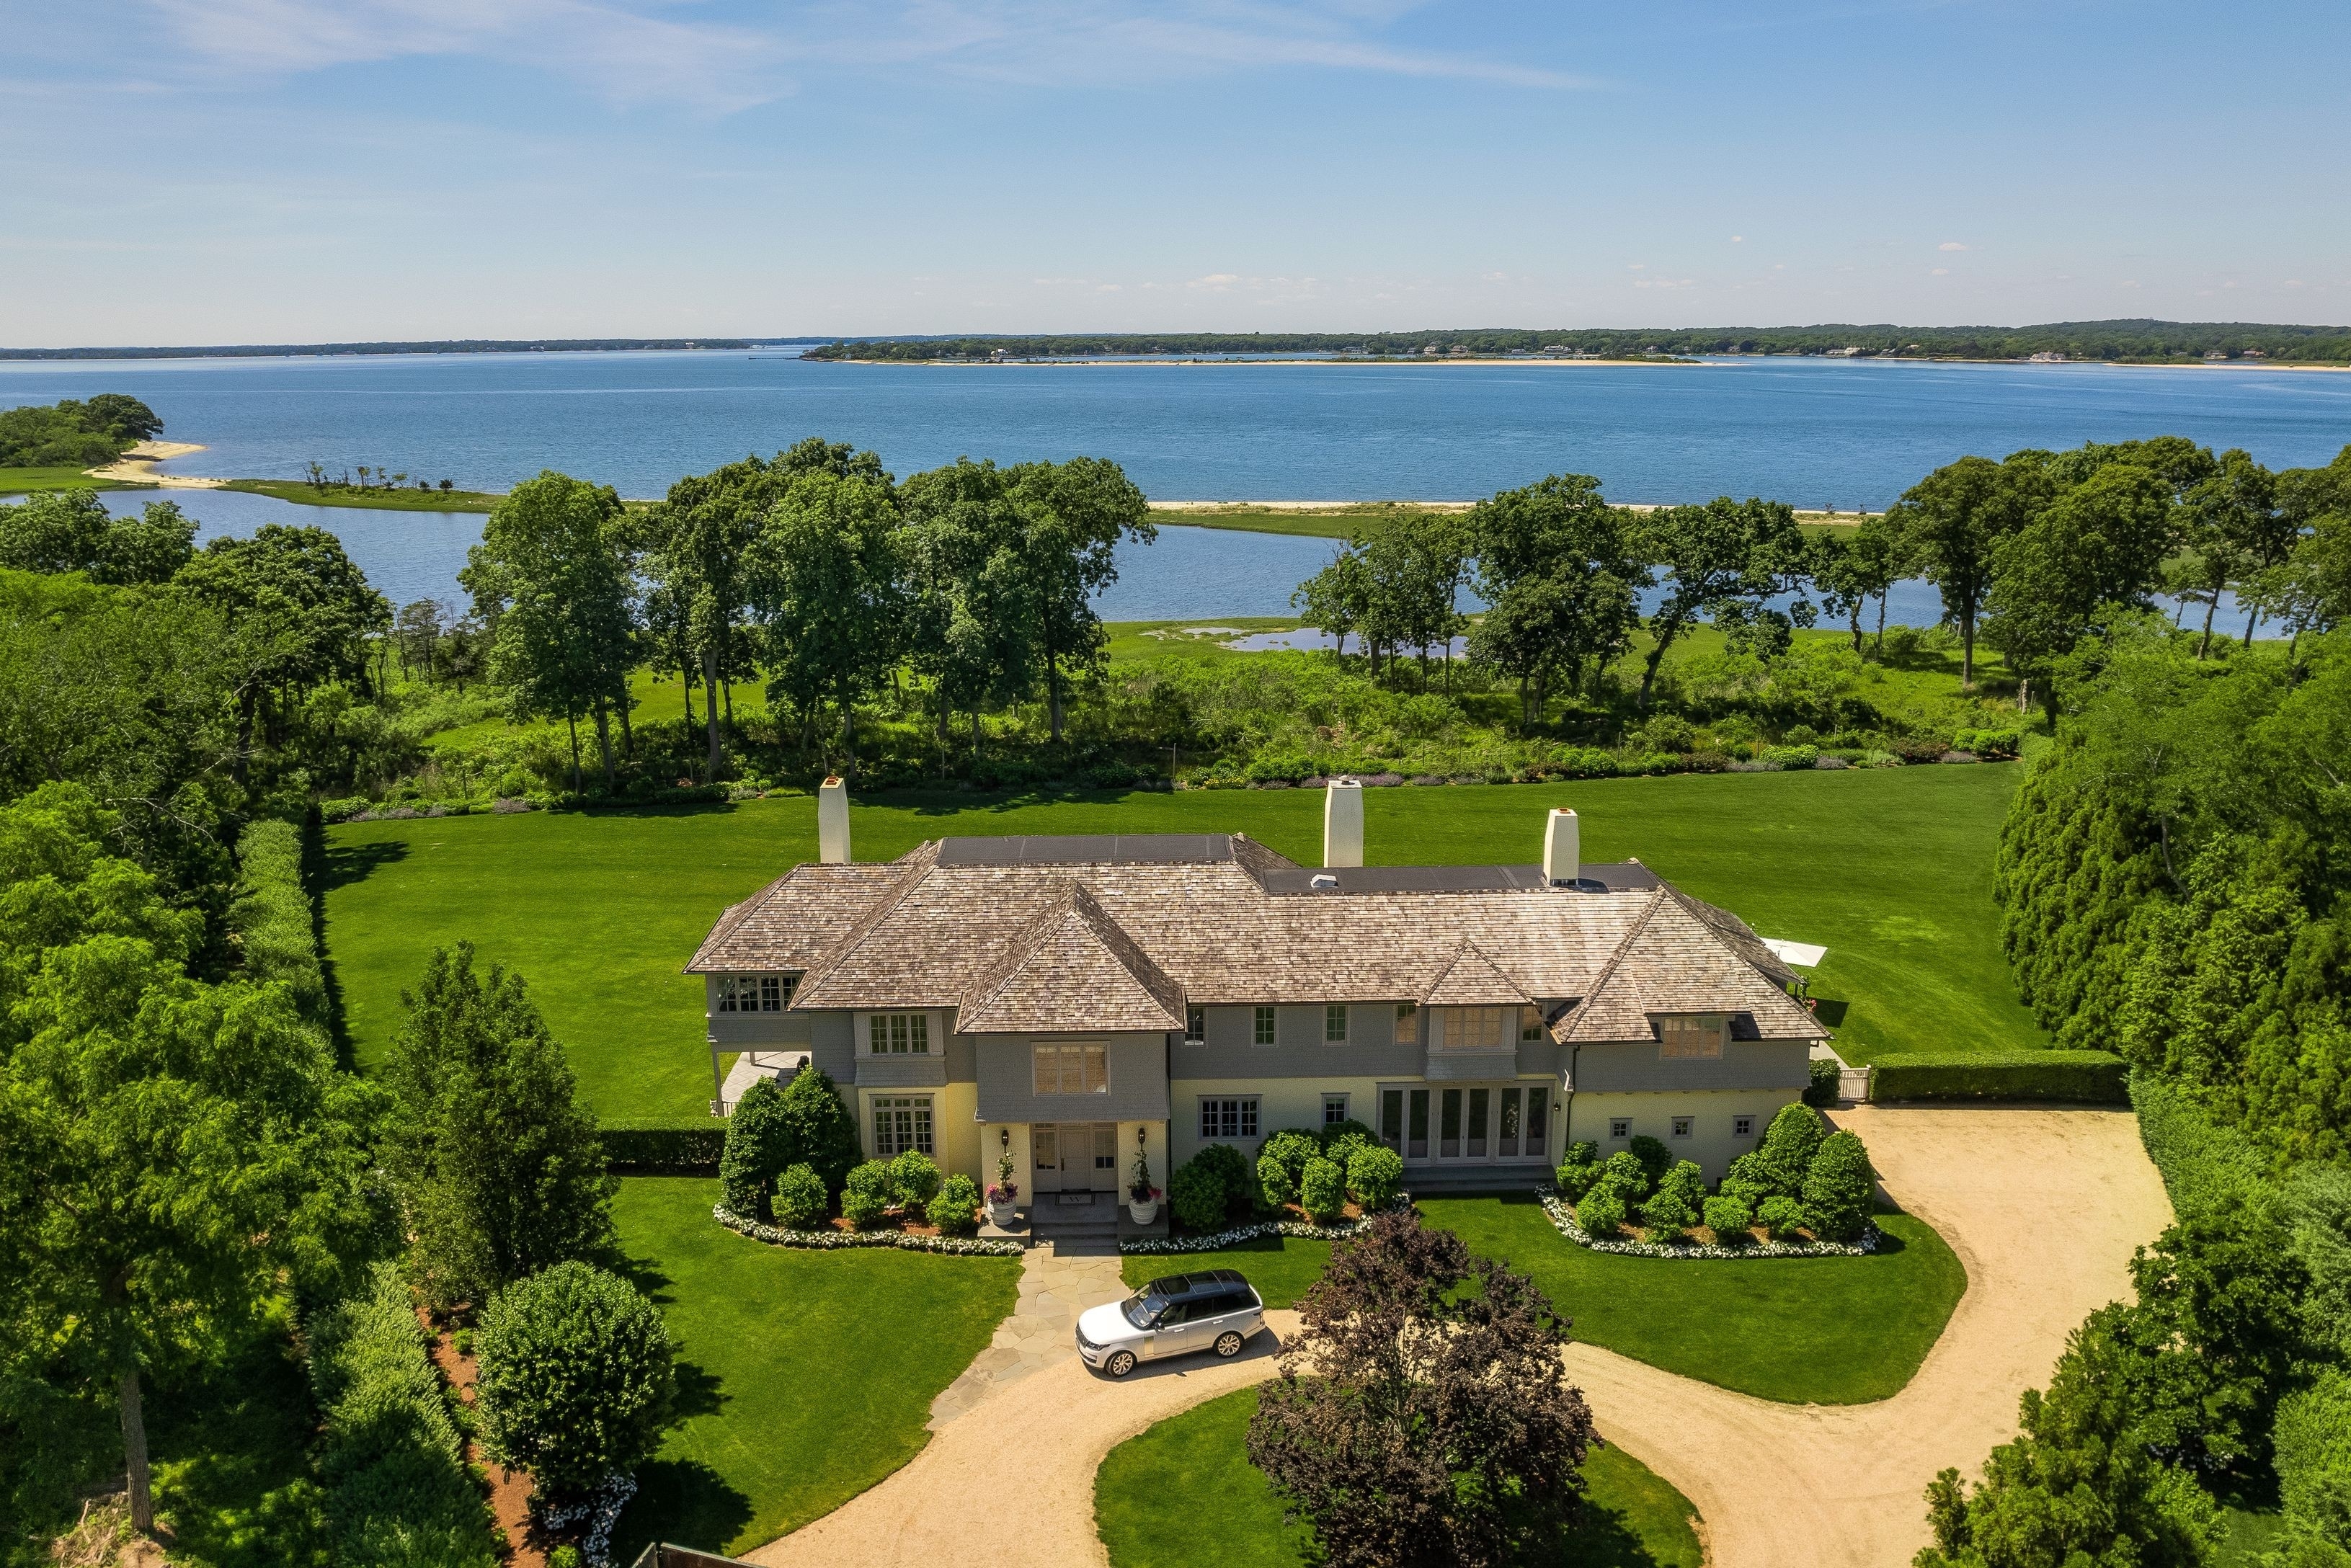 Single Family Home for Sale at North Haven Village, Sag Harbor, New York 11963